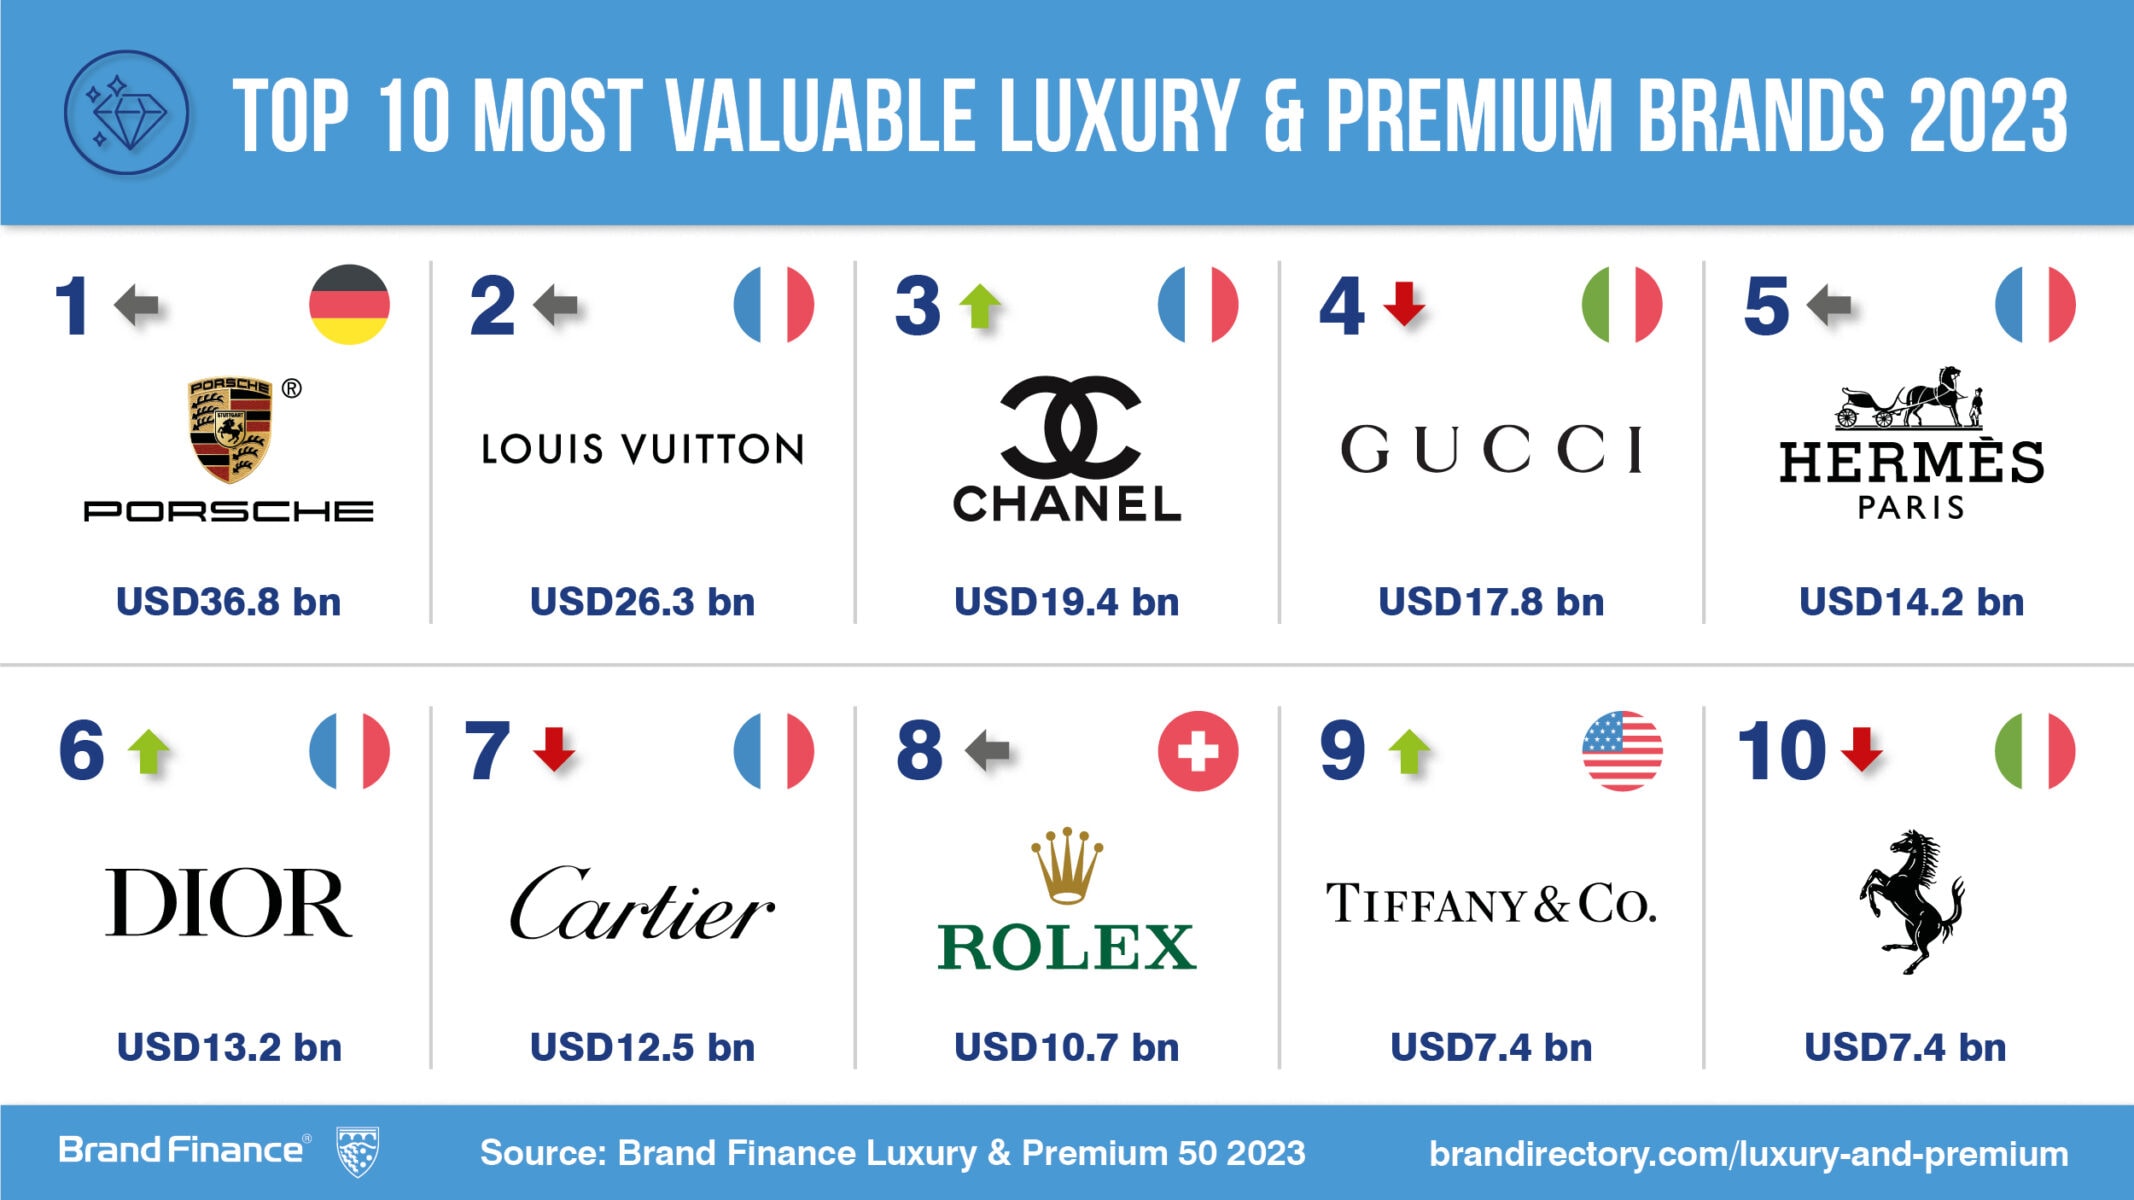 Gucci, Louis Vuitton, Chanel: Luxury sees most brand value growth